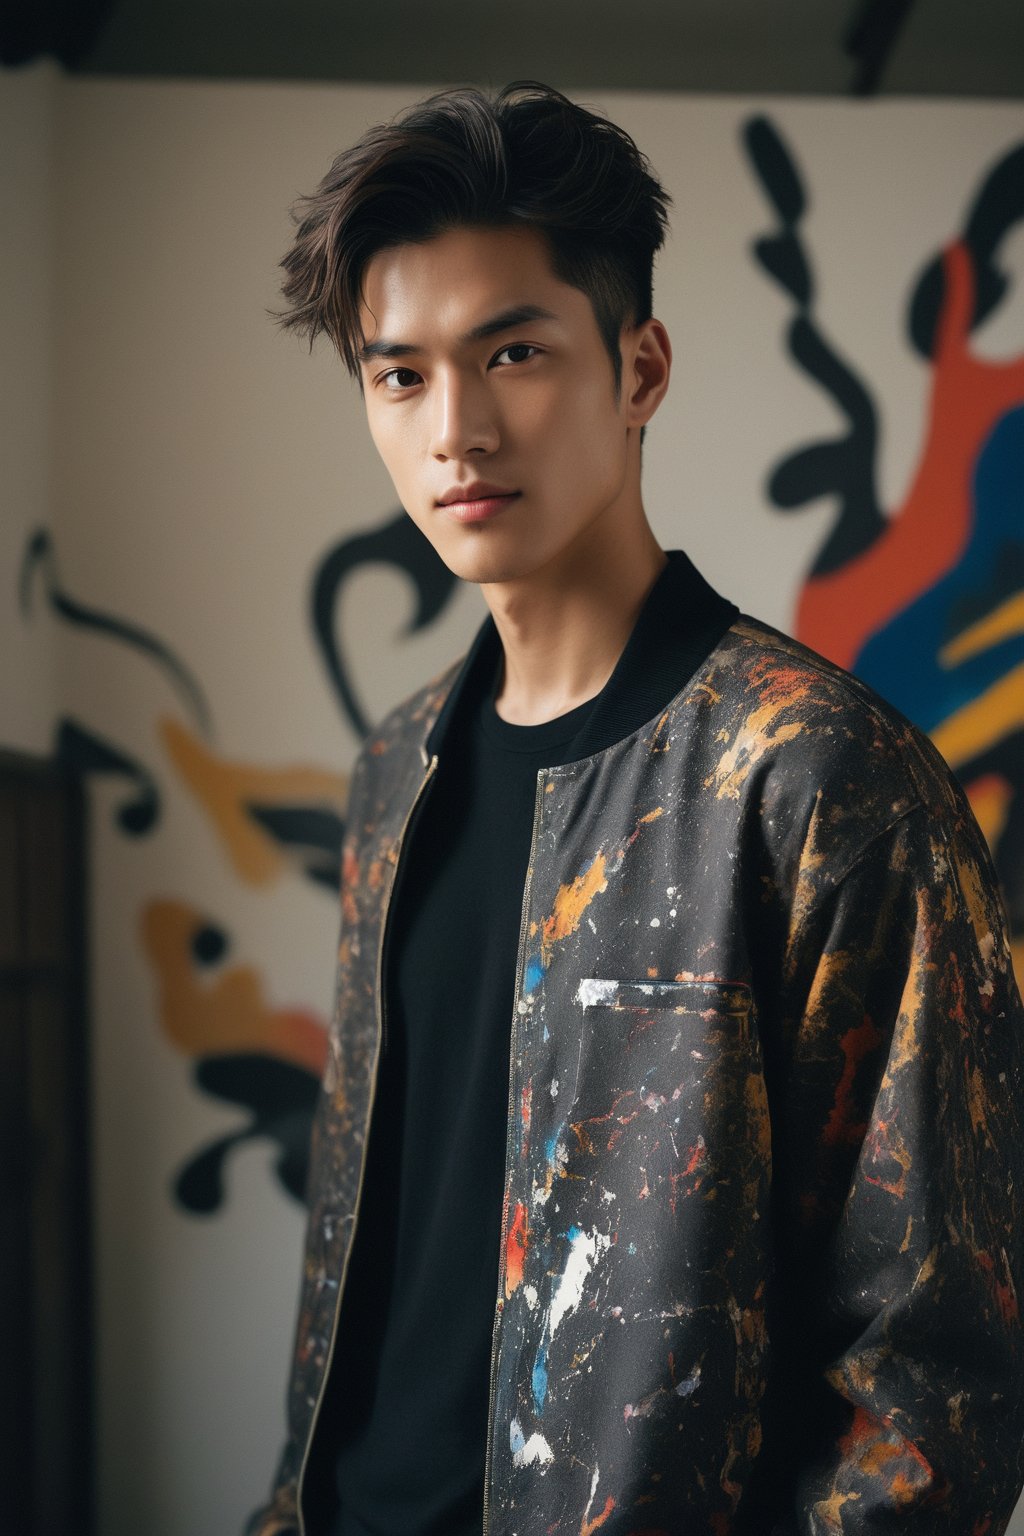 Hasselblad photo portrait of a handsome and mysterious Tokyo young male model, wearing urban clothes inspired by Jackson Pollock, creating the most incredible 2018 fashion look possible. The setting is a clear house with colorful paintings, an astonishing lighting ambiance. The man is standing with an intense look, short haircut, with lots of 12k contrast, many original details. The scene is epic, artistic, with light skin and detailed features. He is facing away from the camera, looking back with a big smile, using a Givenchy 100mm portrait lens. The lighting is golden and professionally captured by a natural light photographer.